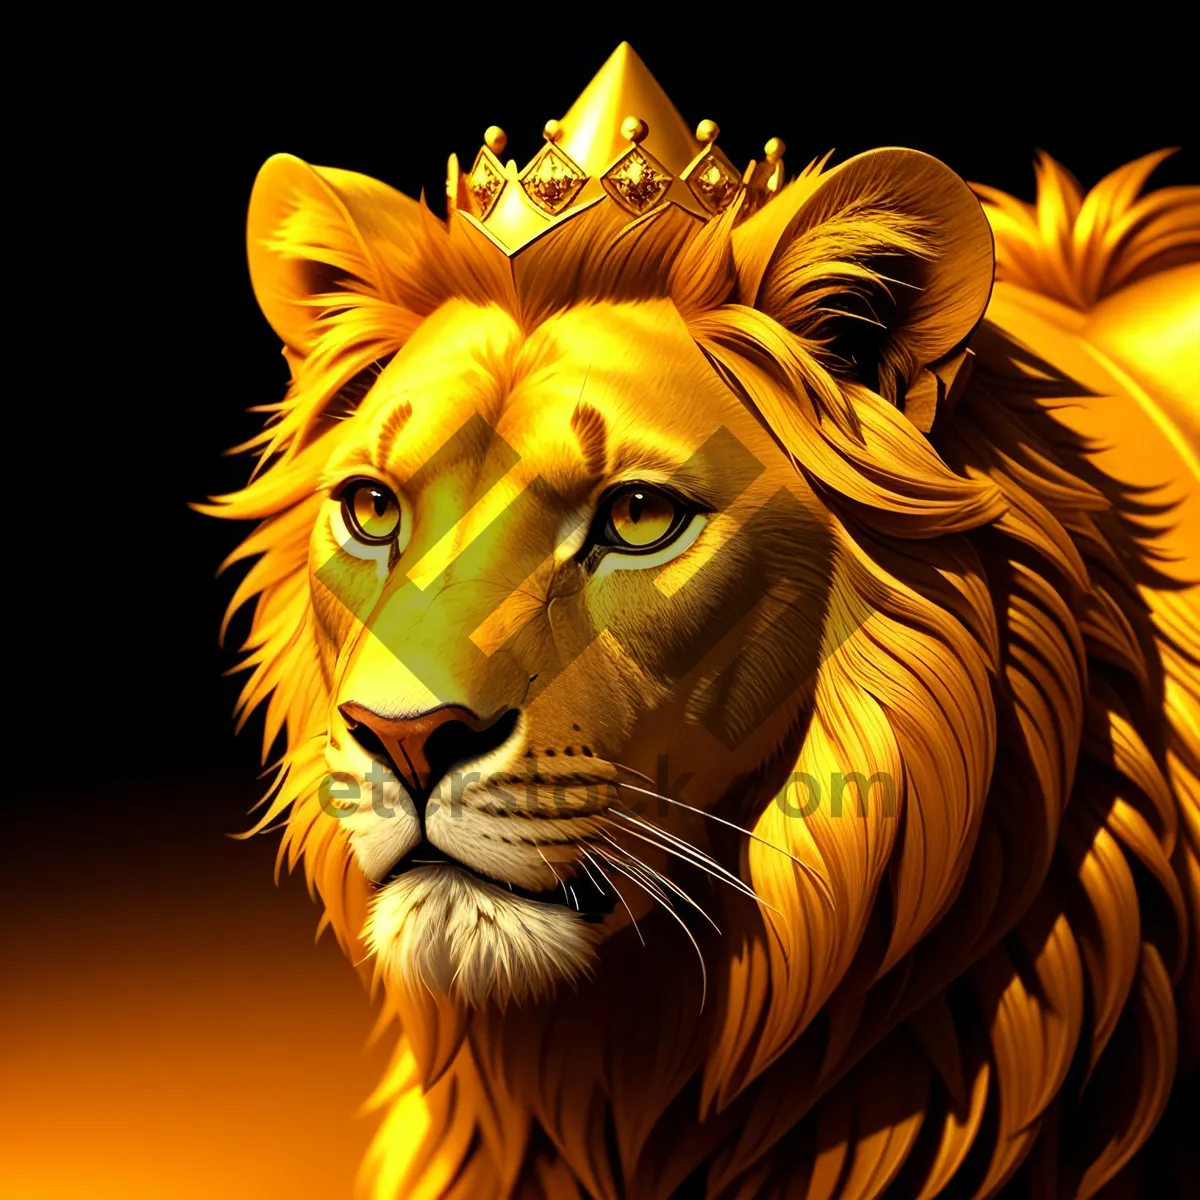 Picture of Majestic King of the Jungle - Lion Portrait